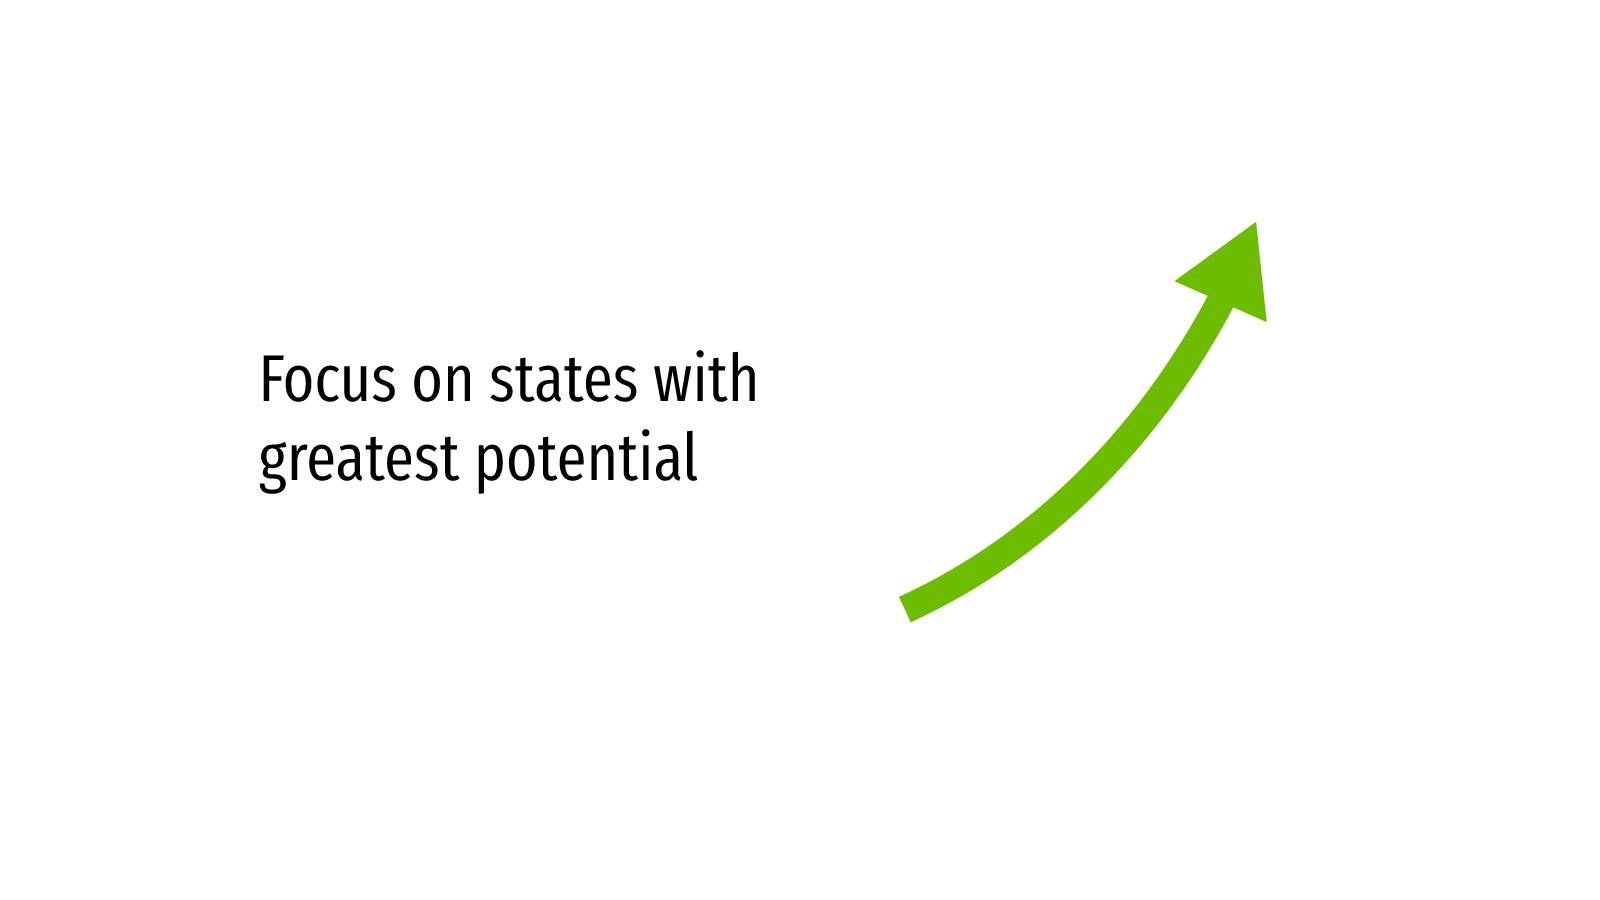 Focus on states with greatest potential